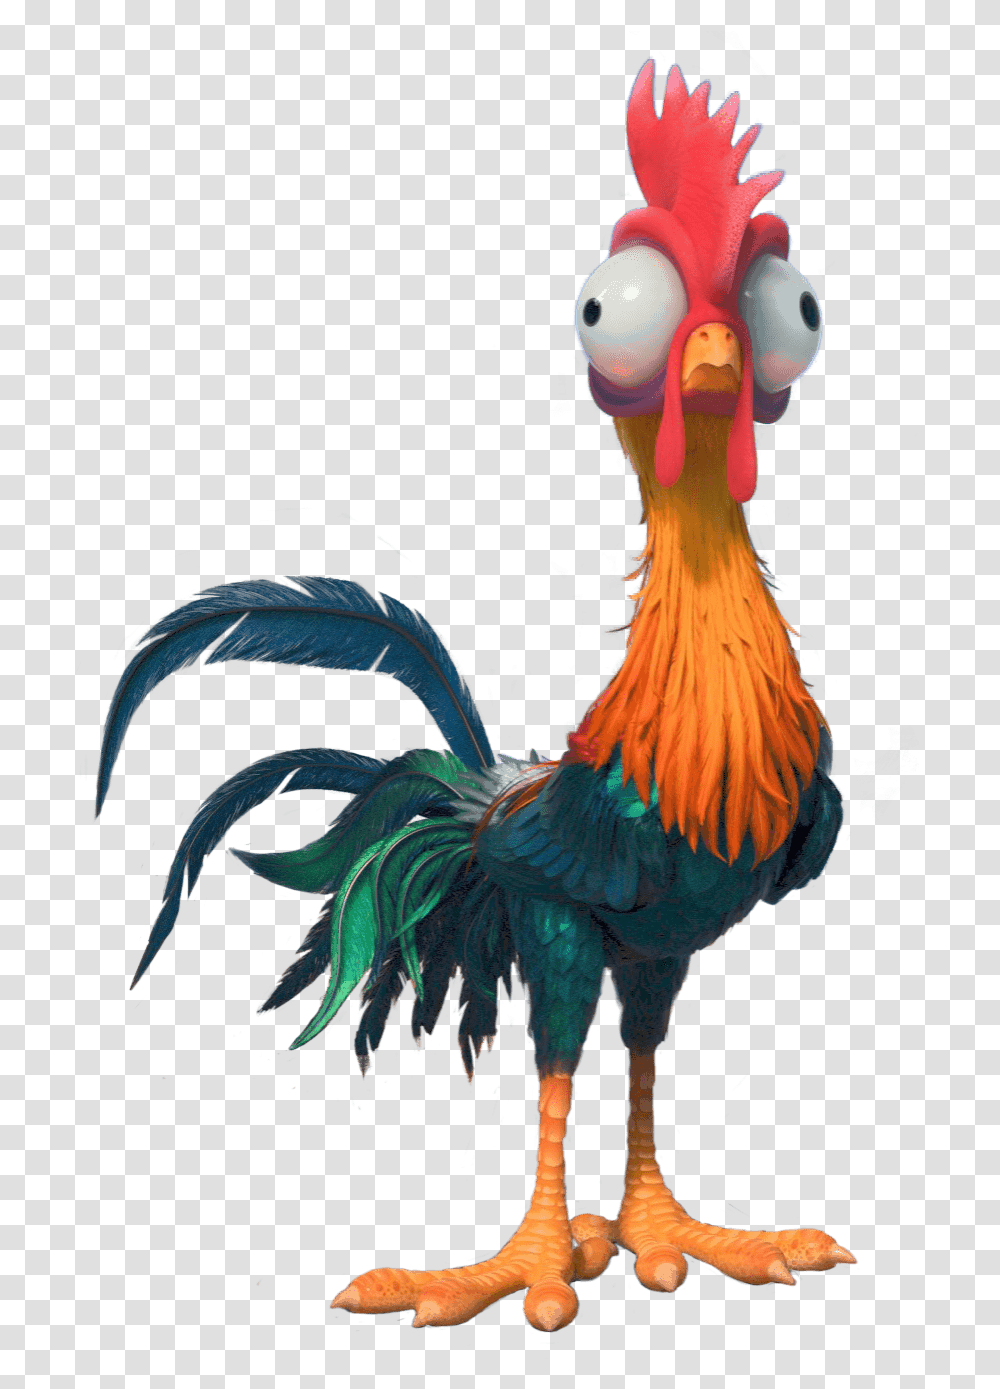 Moana Hei The Rooster Image Moana Hei Hei, Bird, Animal, Chicken, Poultry Transparent Png